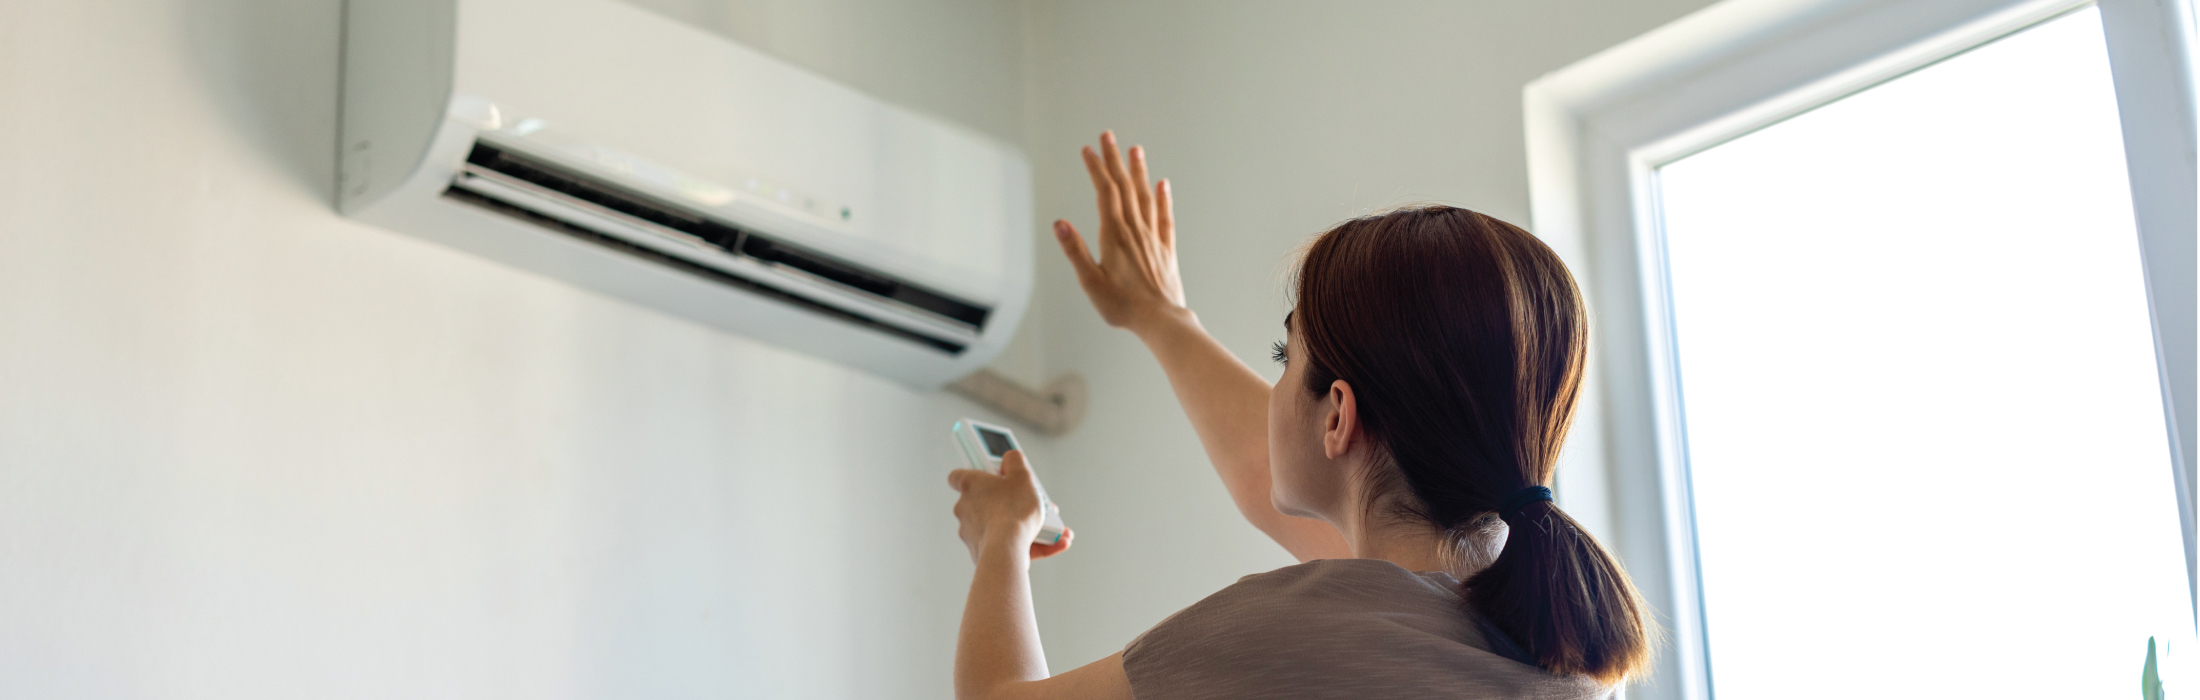 woman testing HVAC unit because it's blowing hot air